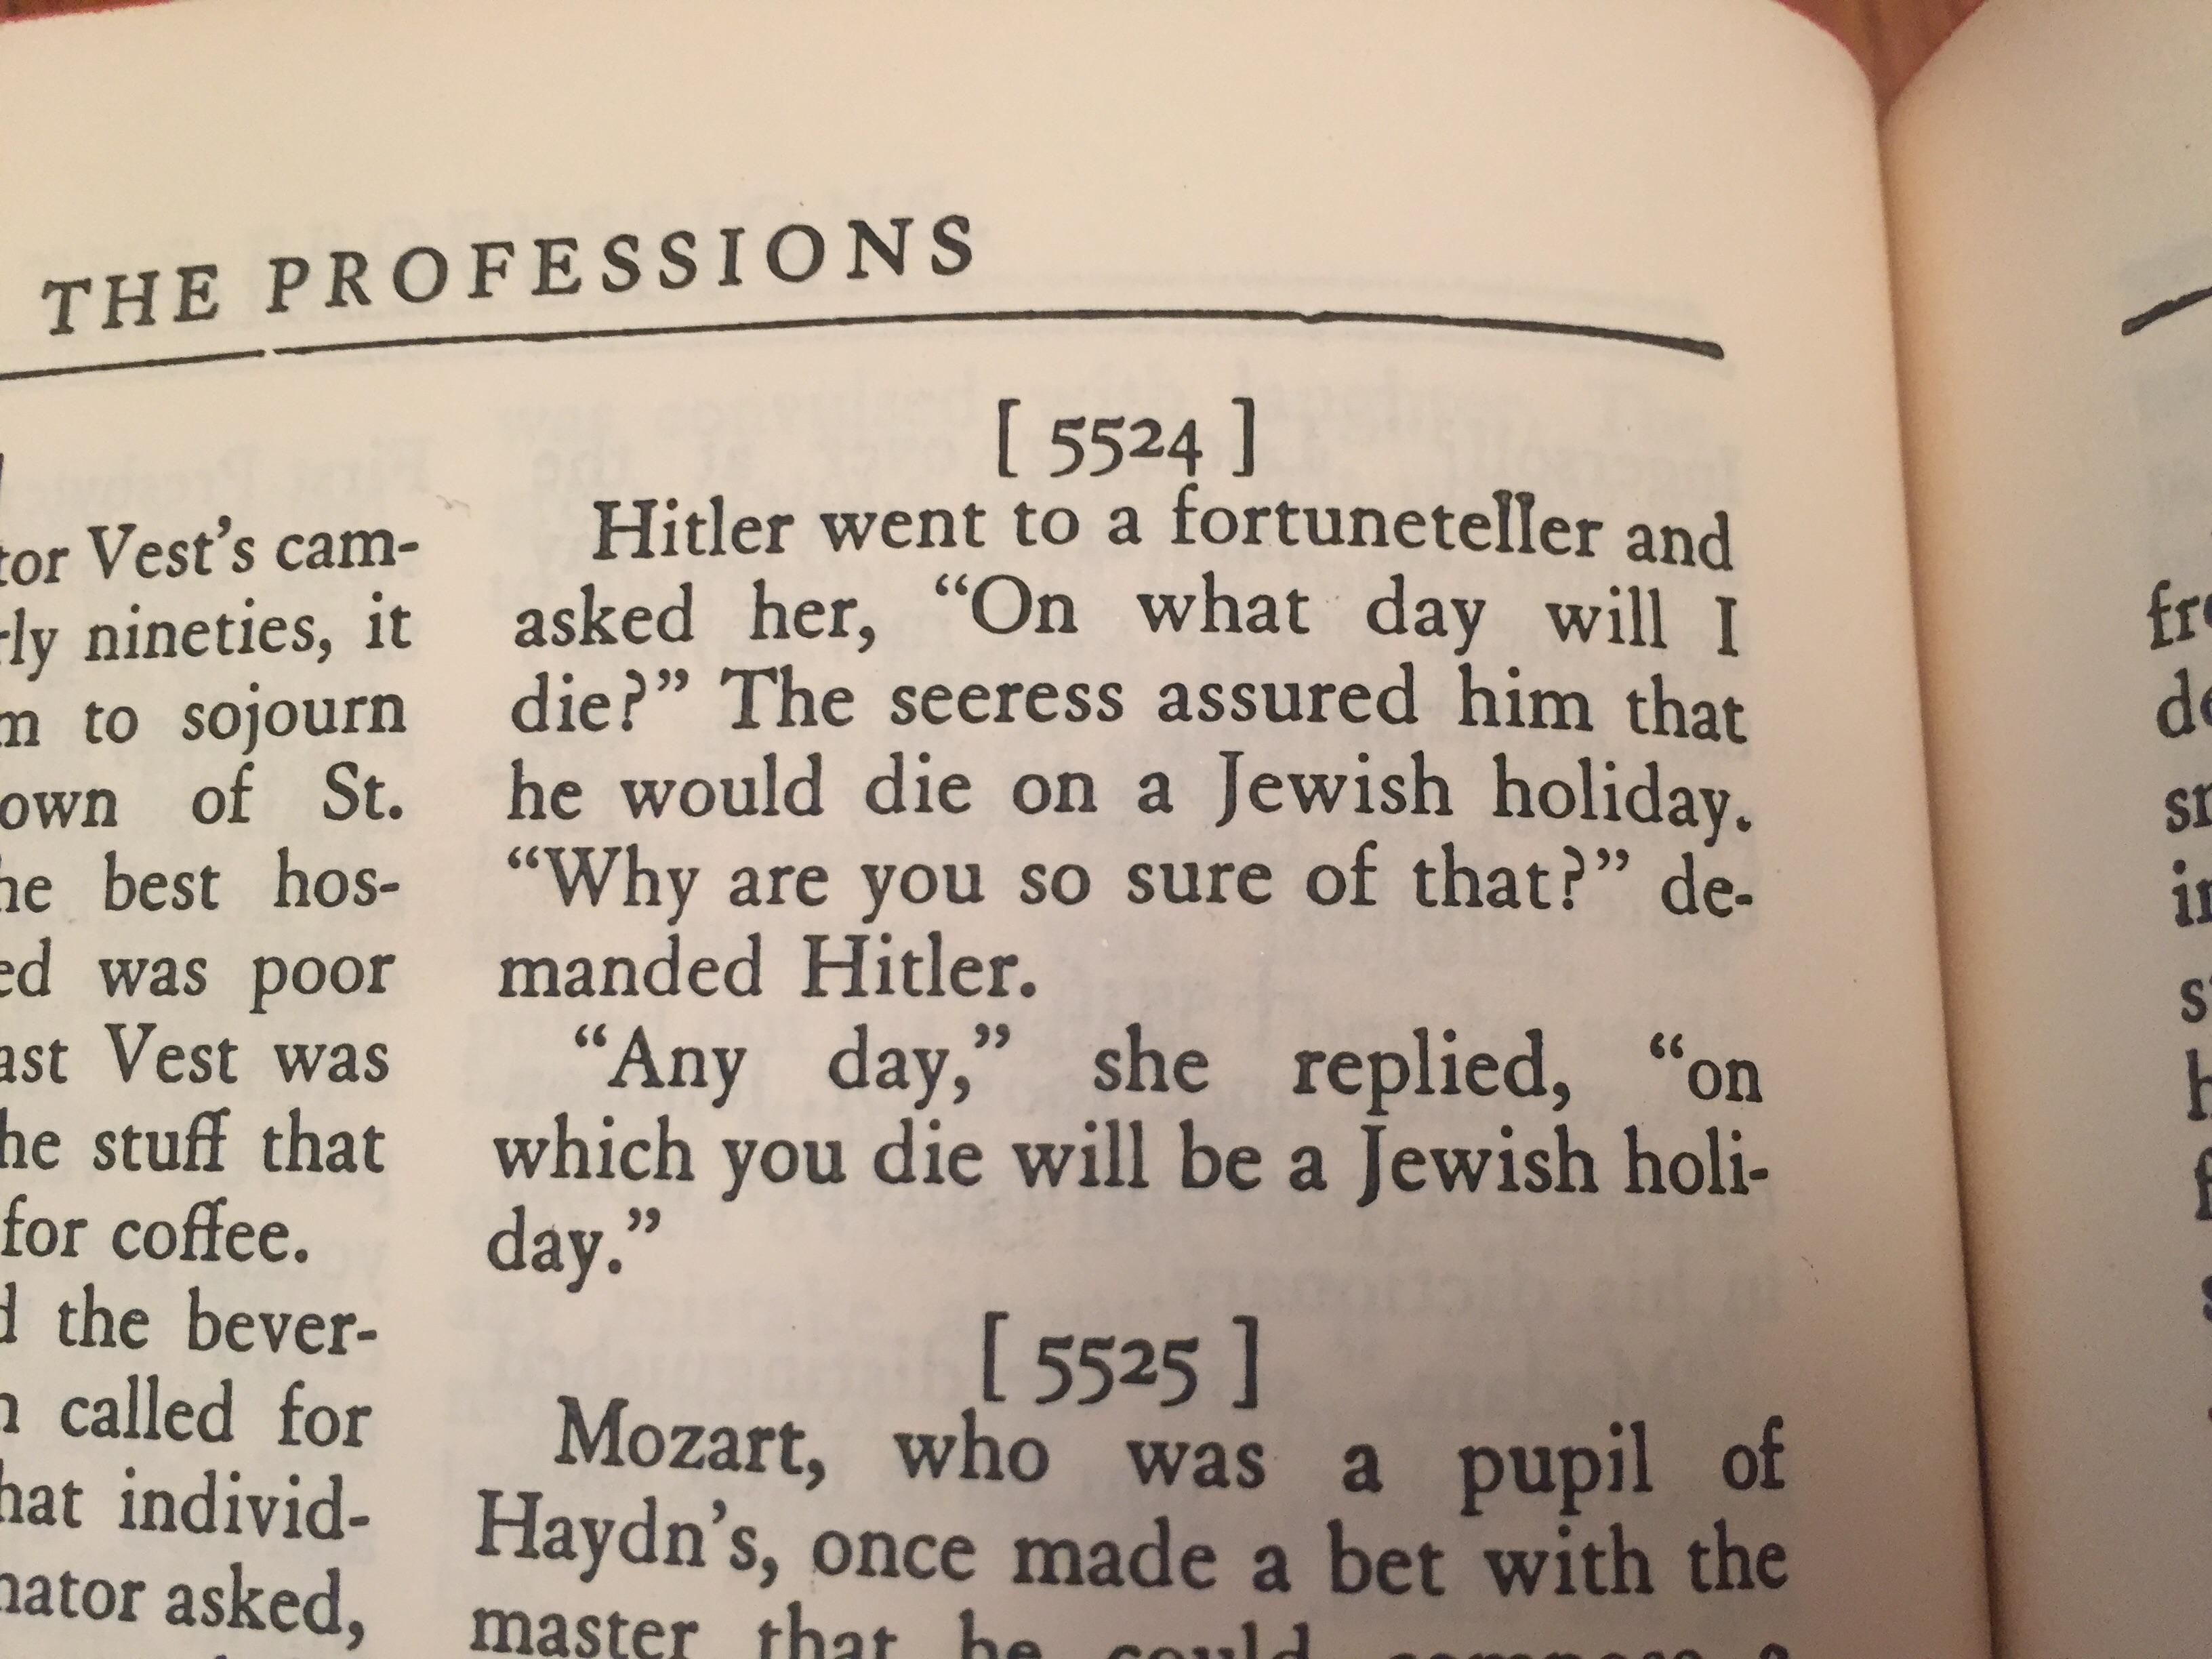 This is a joke book from 1940, and this has got to be the best joke in the entire book.